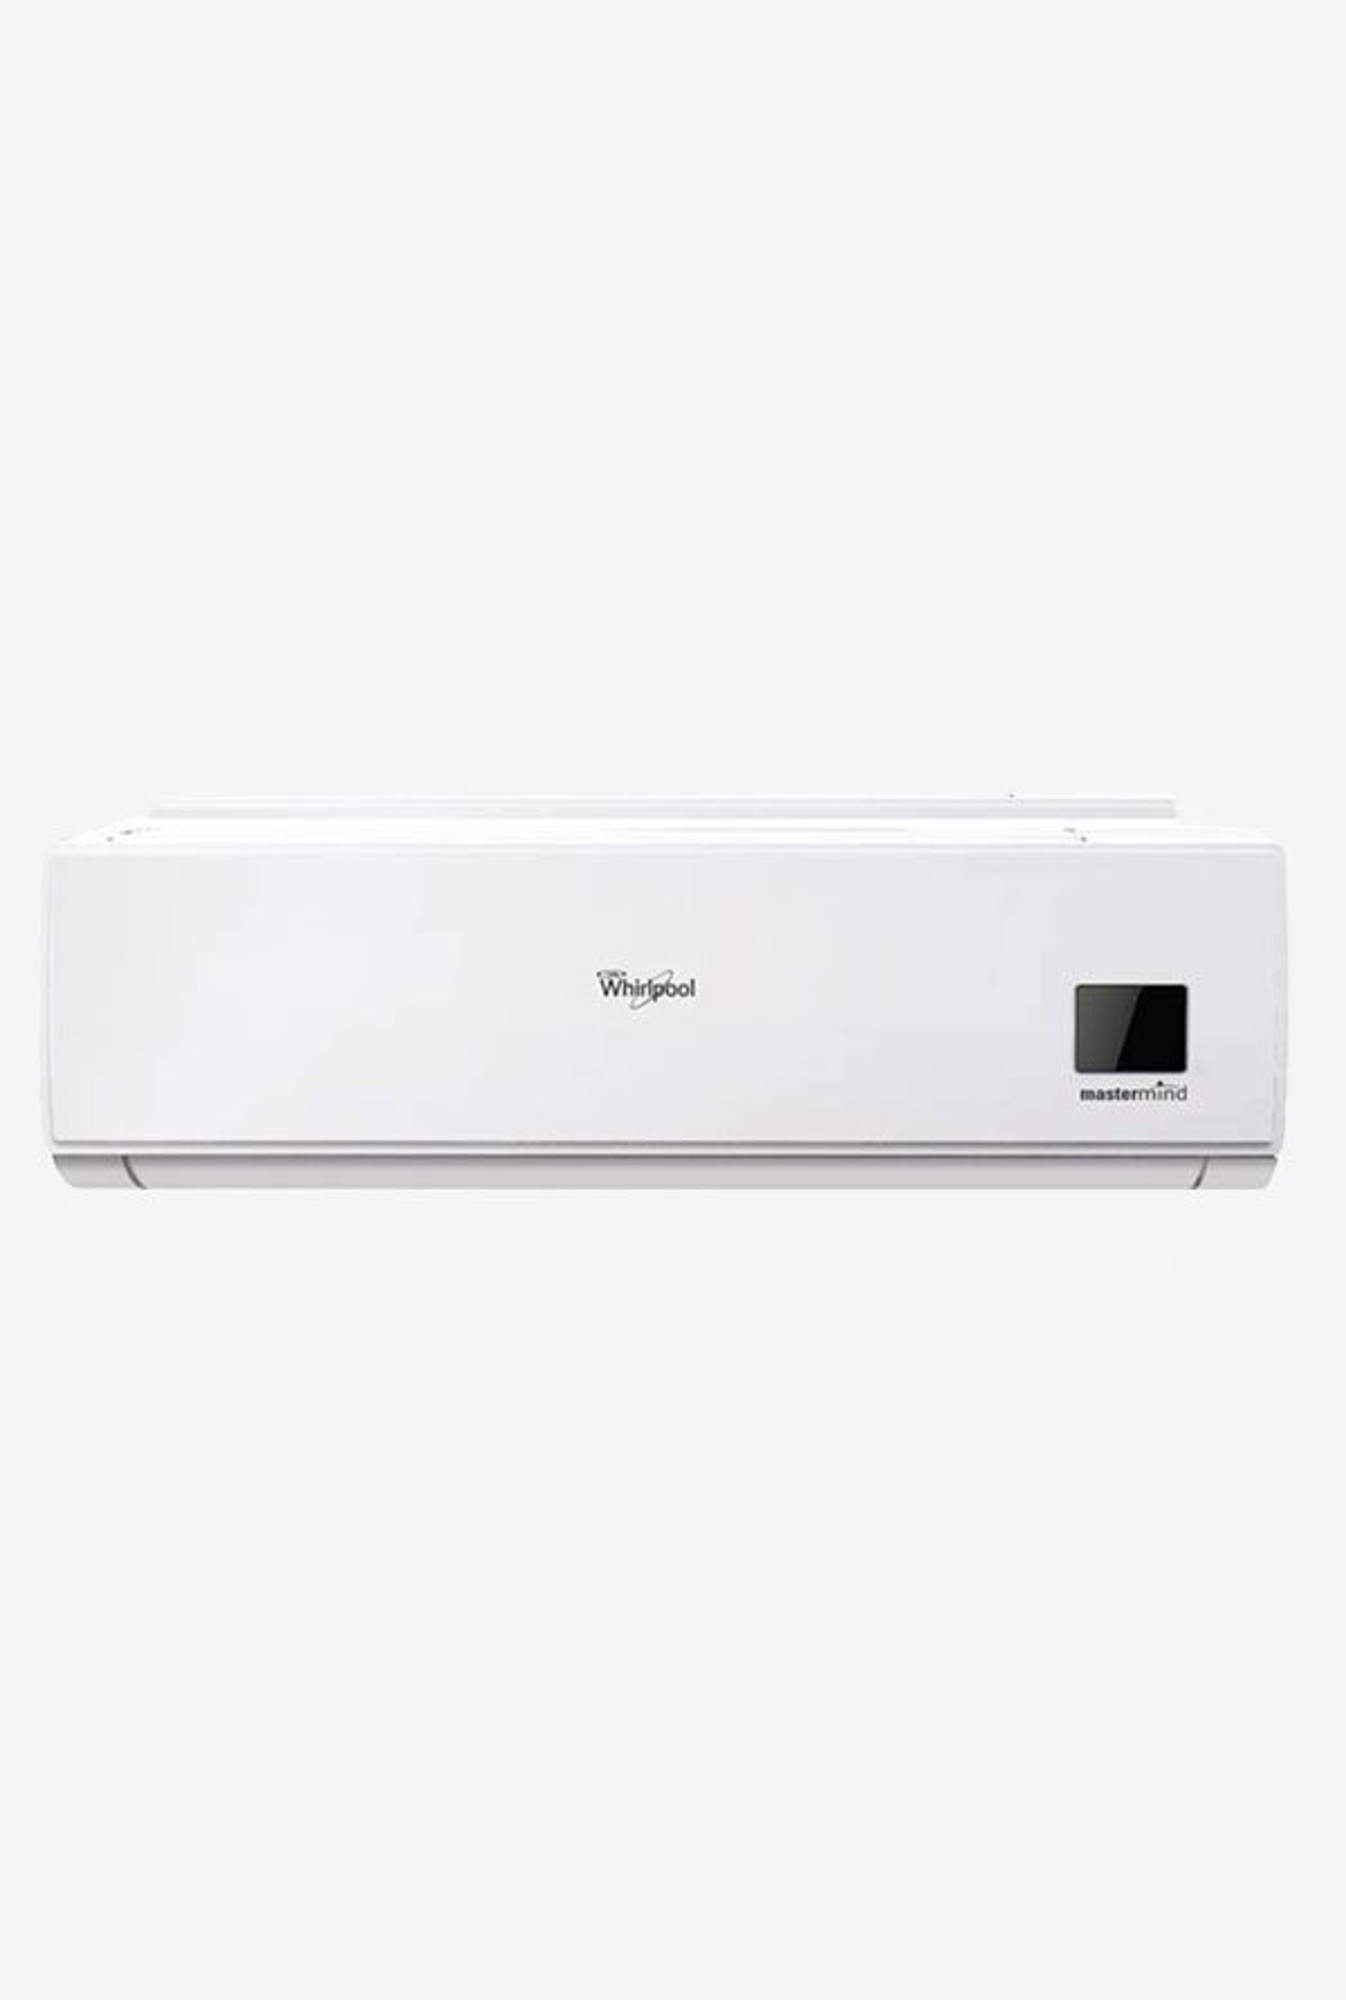 Whirlpool Mastermind Deluxe III 1.5 Ton 3 Star Self Clean Function Split AC + Extra 15% Discount